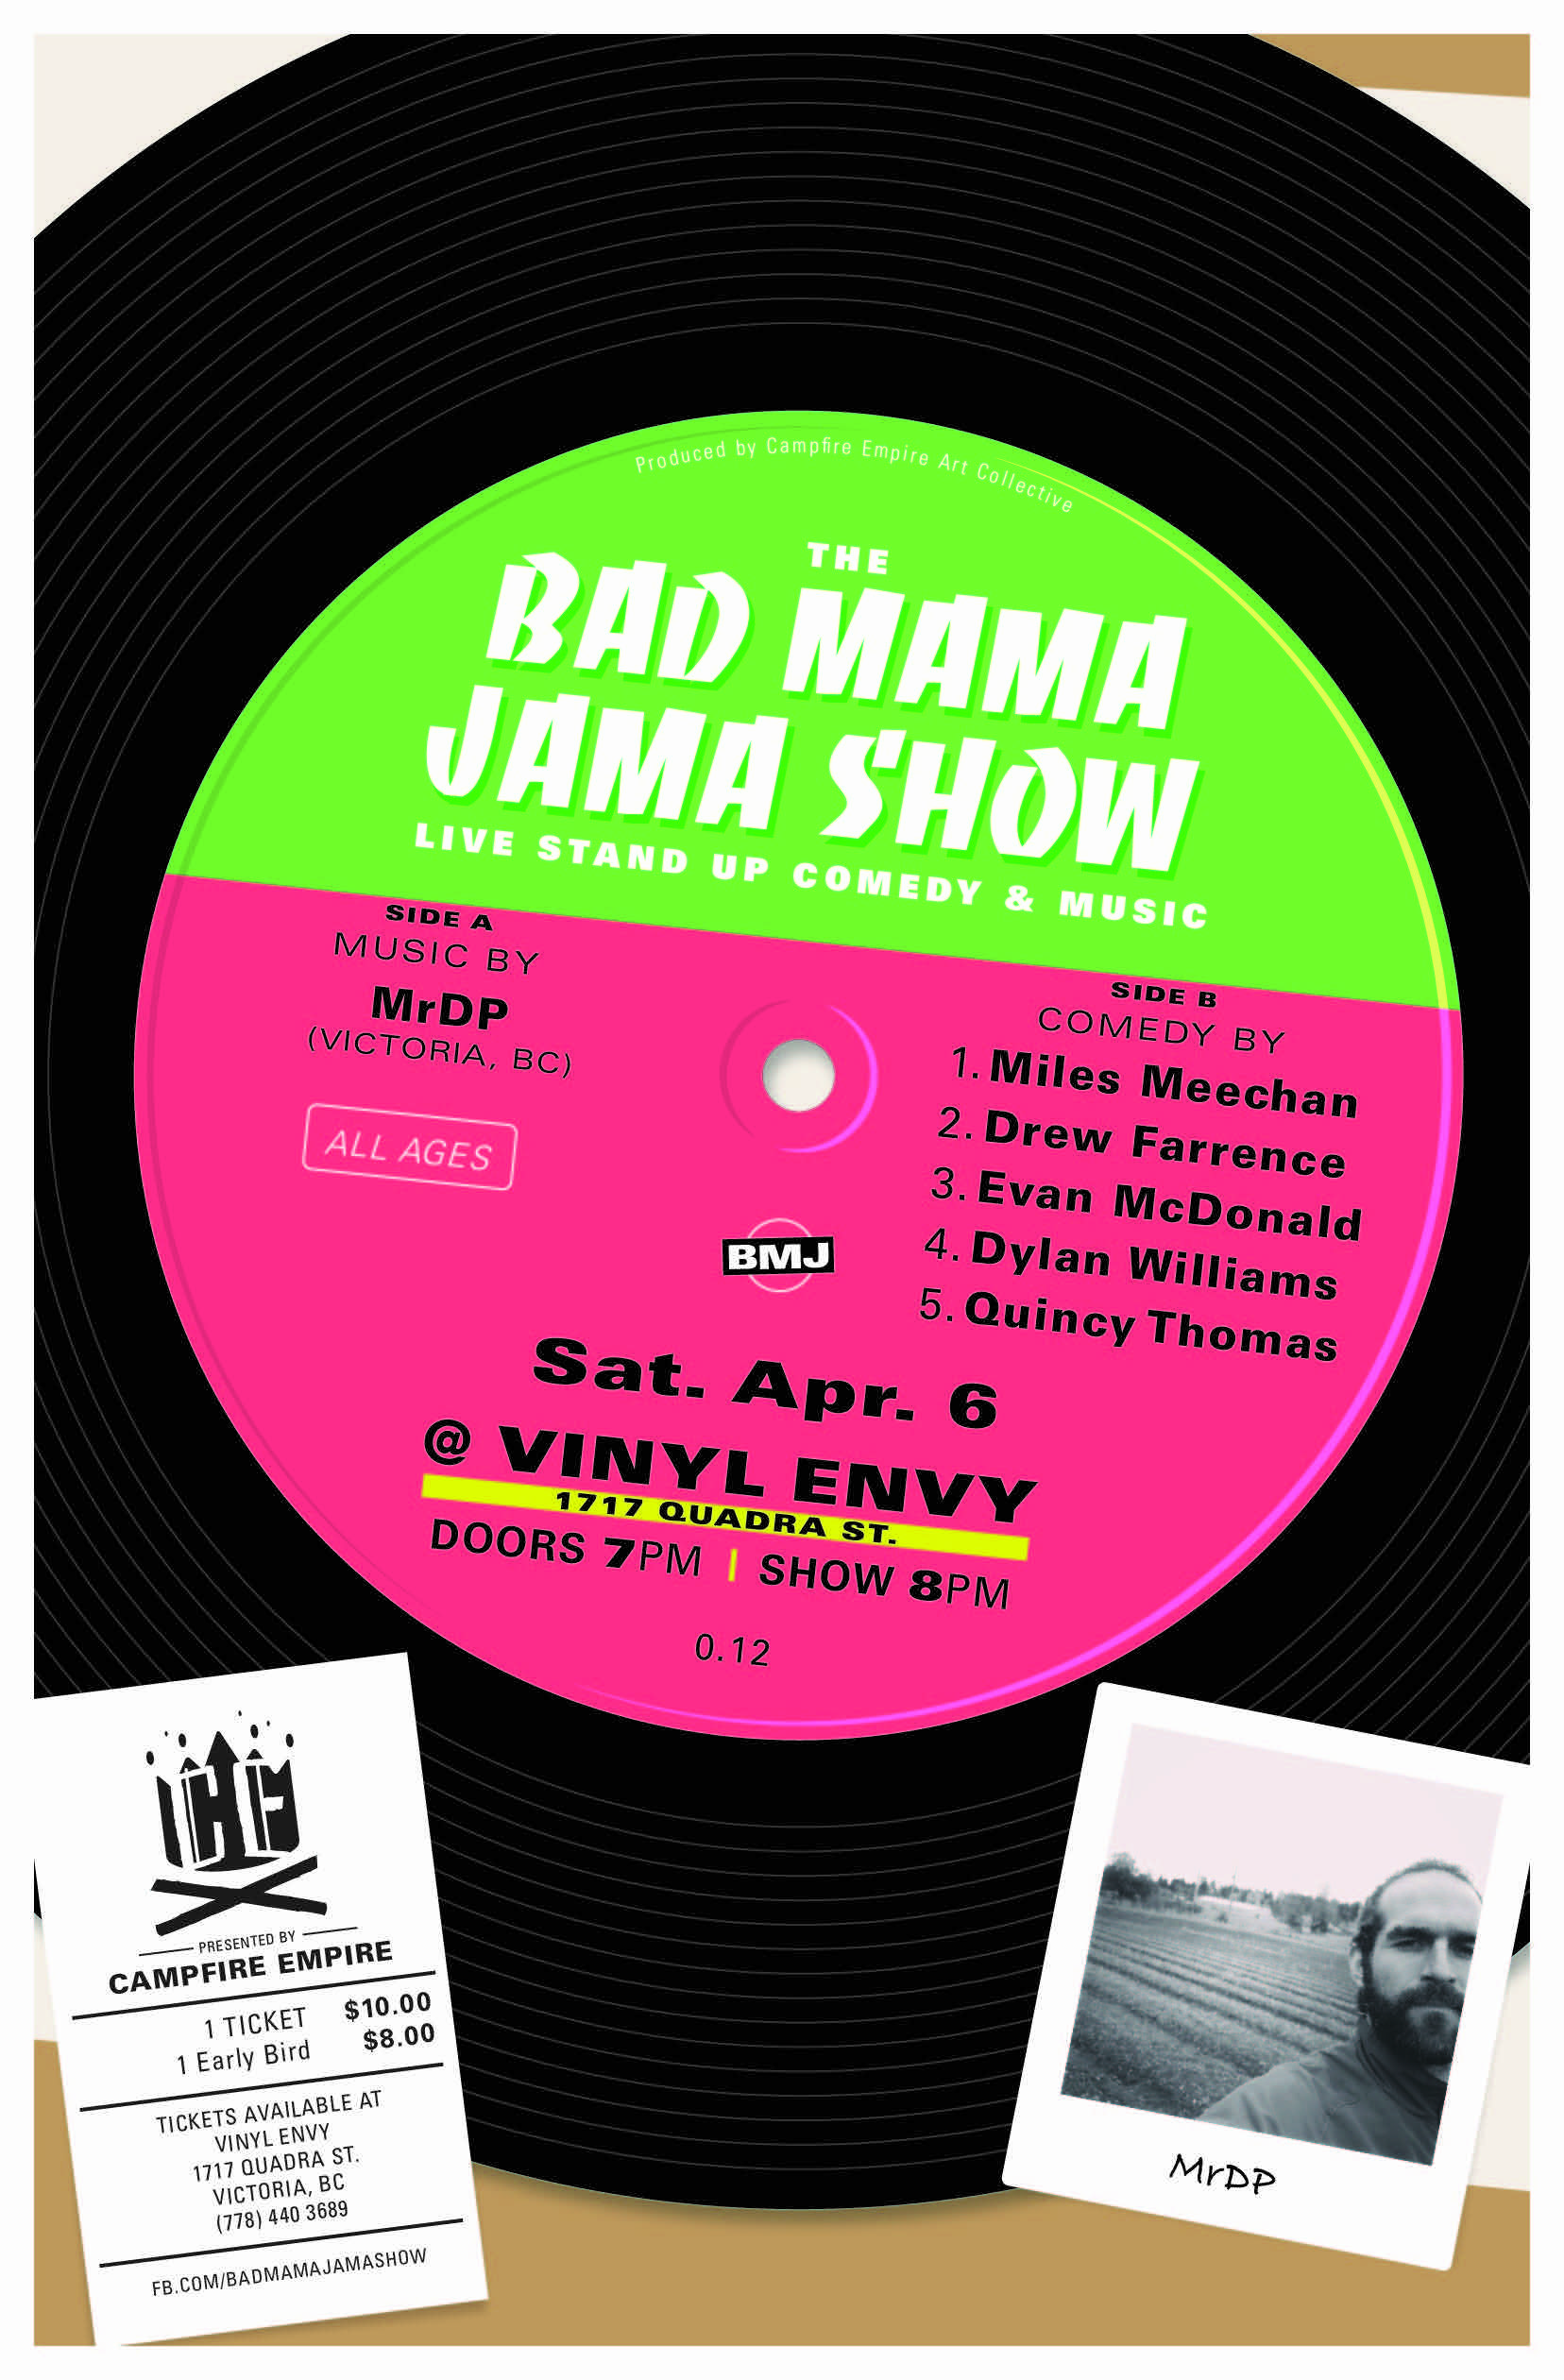 The Bad Mama Jama Show packs a one-two punch